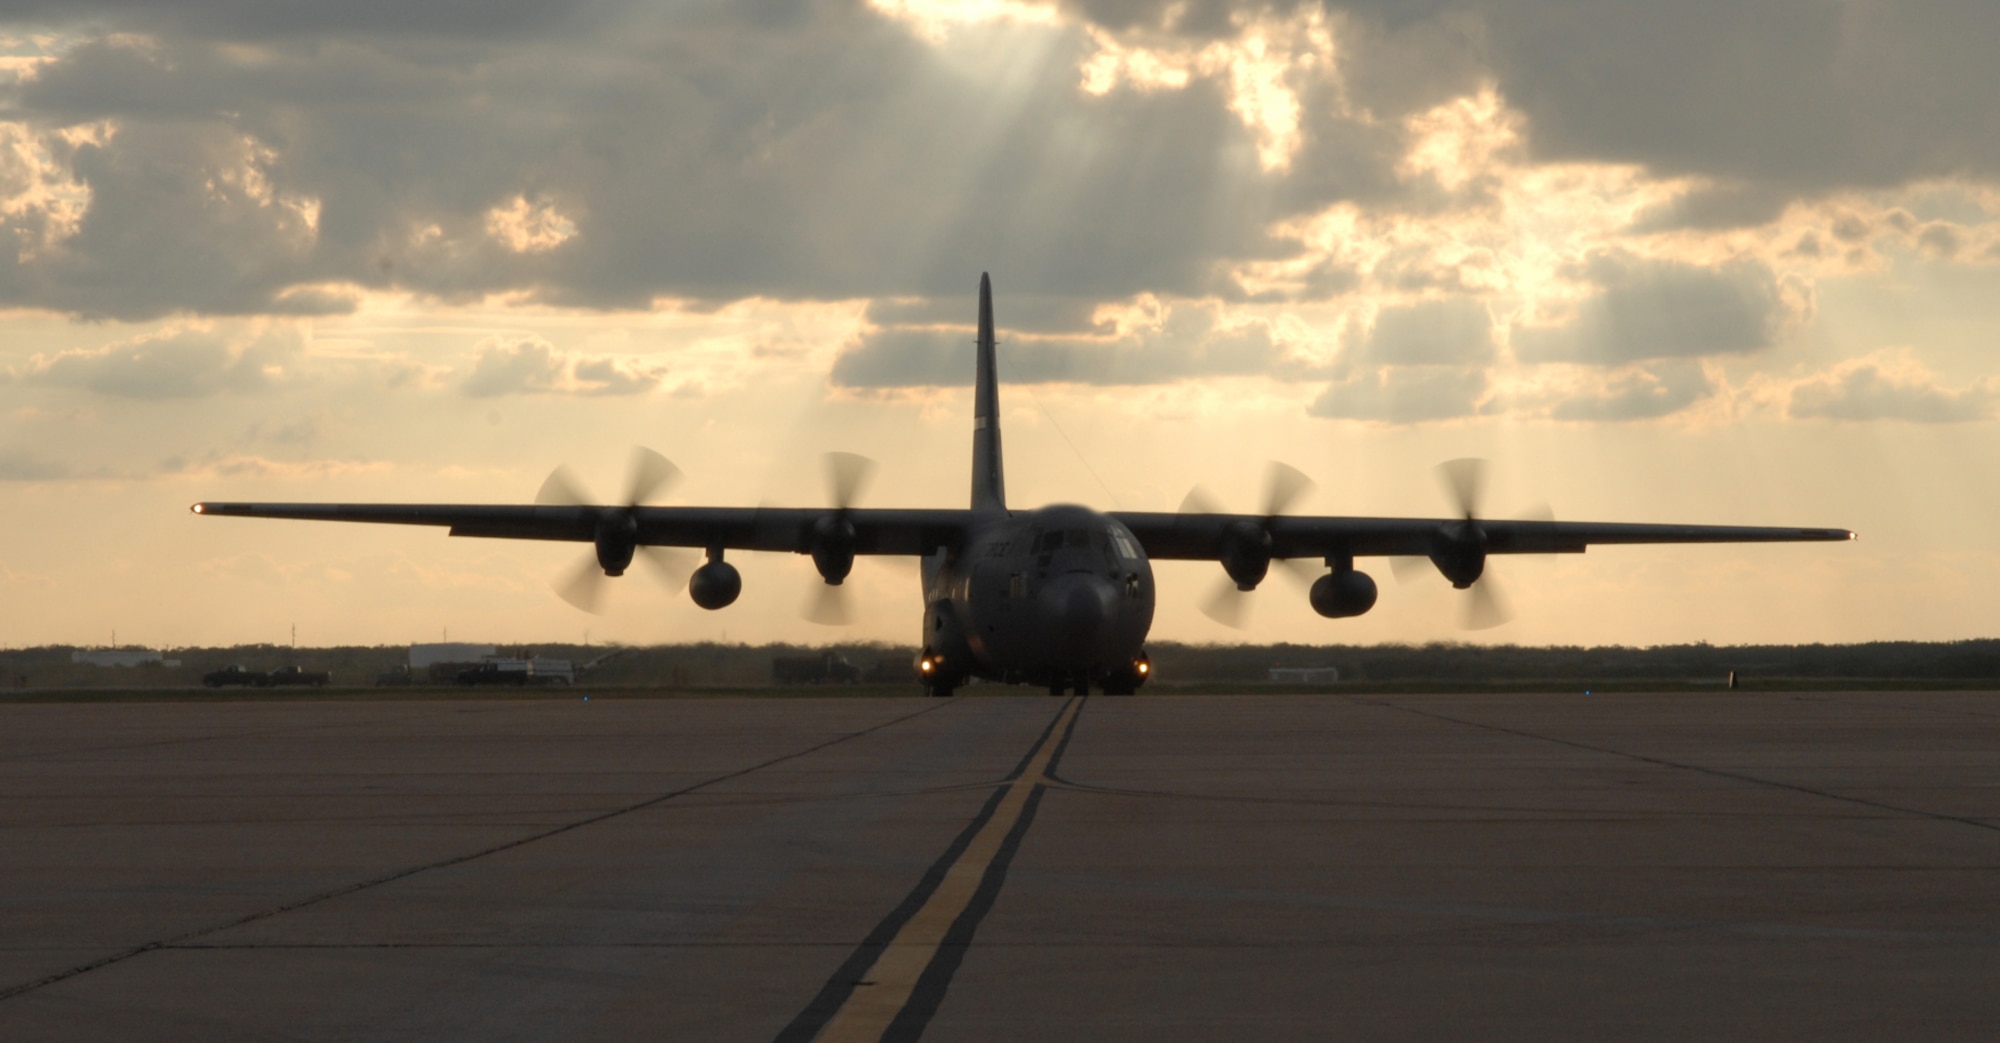 DYESS AIR FORCE BASE, Texas - A C-130 takes off from Dyess' taxiway Sept. 24. After the main runway on base was closed for about 60 days for repair and 20 B-1s were relocated, the taxiway here was repainted and lighting was moved to make it usable to the 317th Airlift Group's Hercs stationed here. This transition to using a taxiway for daily operations is a historic move for the Air Mobility Command aircraft, but the "trash haulers" of the sky are designed to be able to land on small areas, even dirt strips when necessary, making the change an easy one for Dyess. (U.S. Air Force photo by Airman 1st  Class Jennifer Romig)
